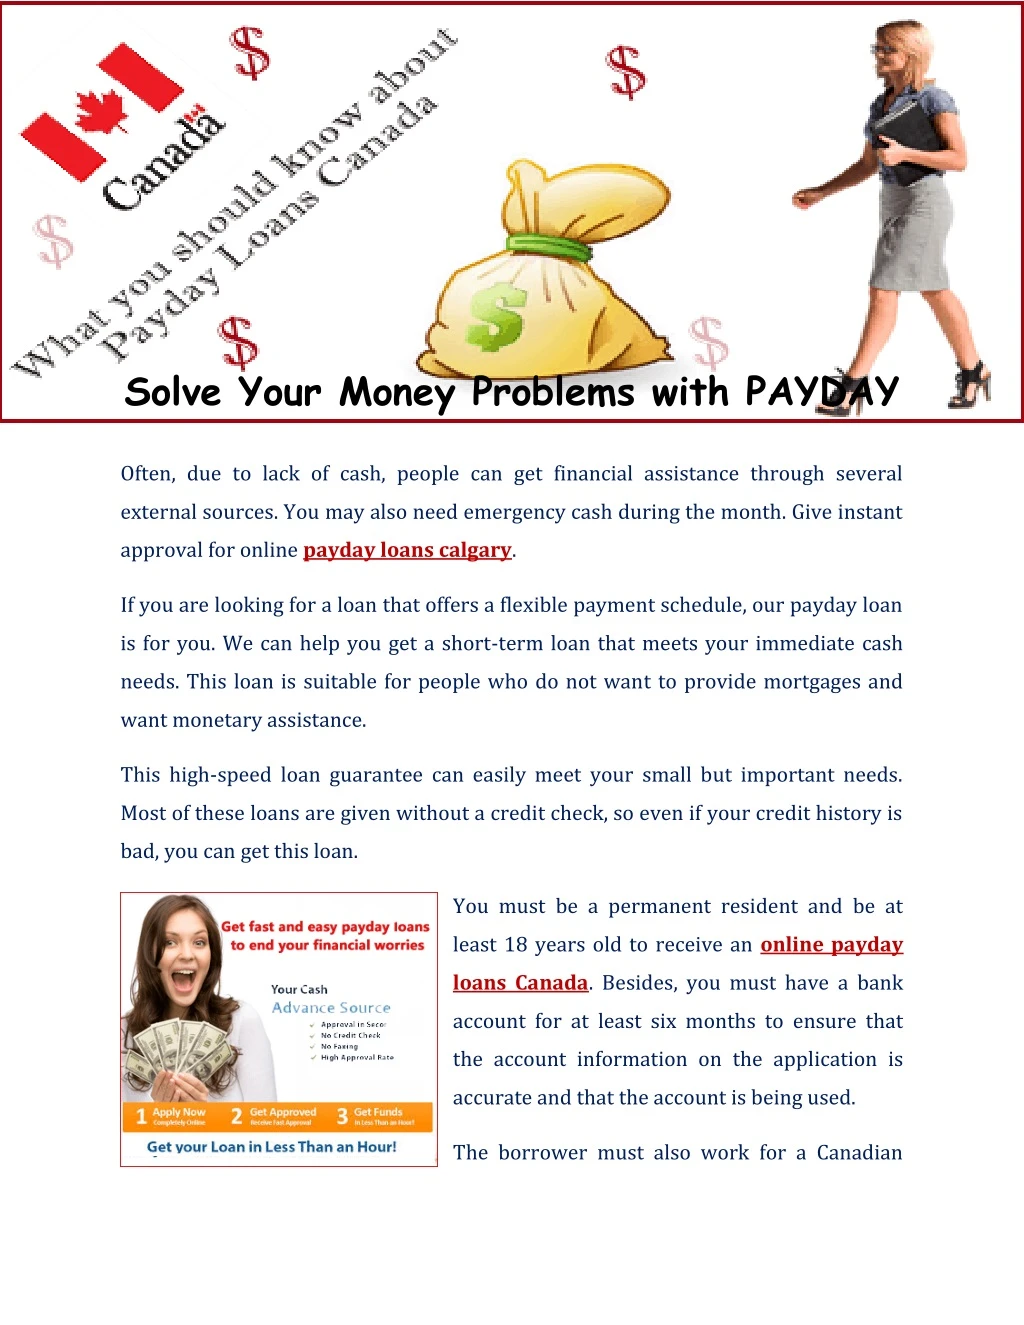 solve your money problems with payday